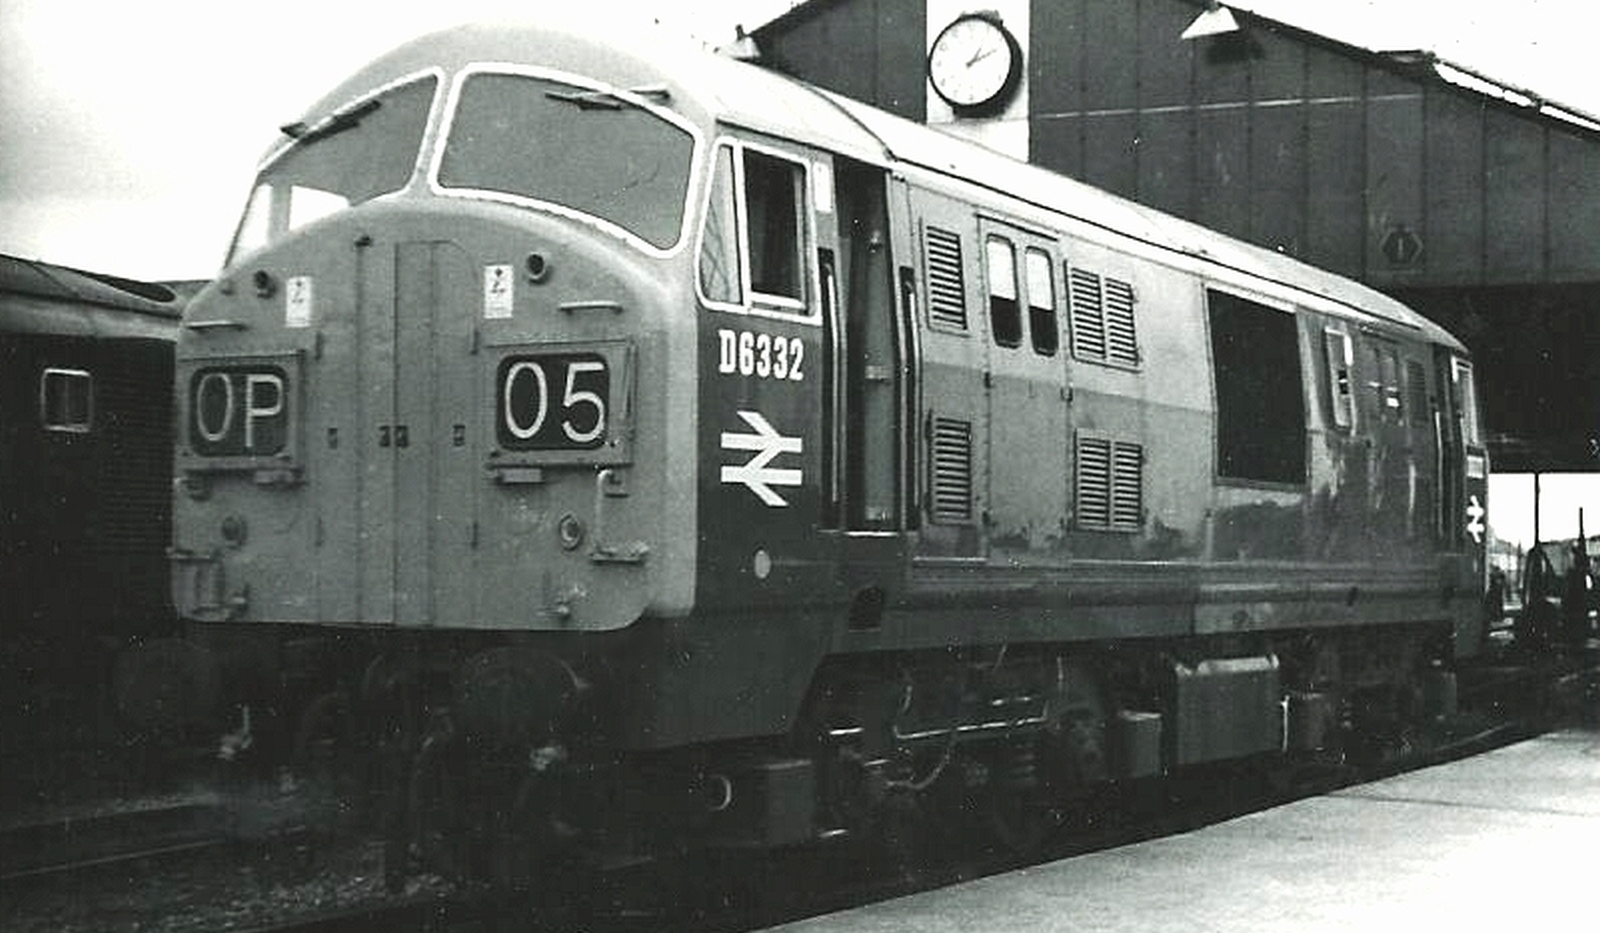 D6332 in July 1967 at Old Oak Common